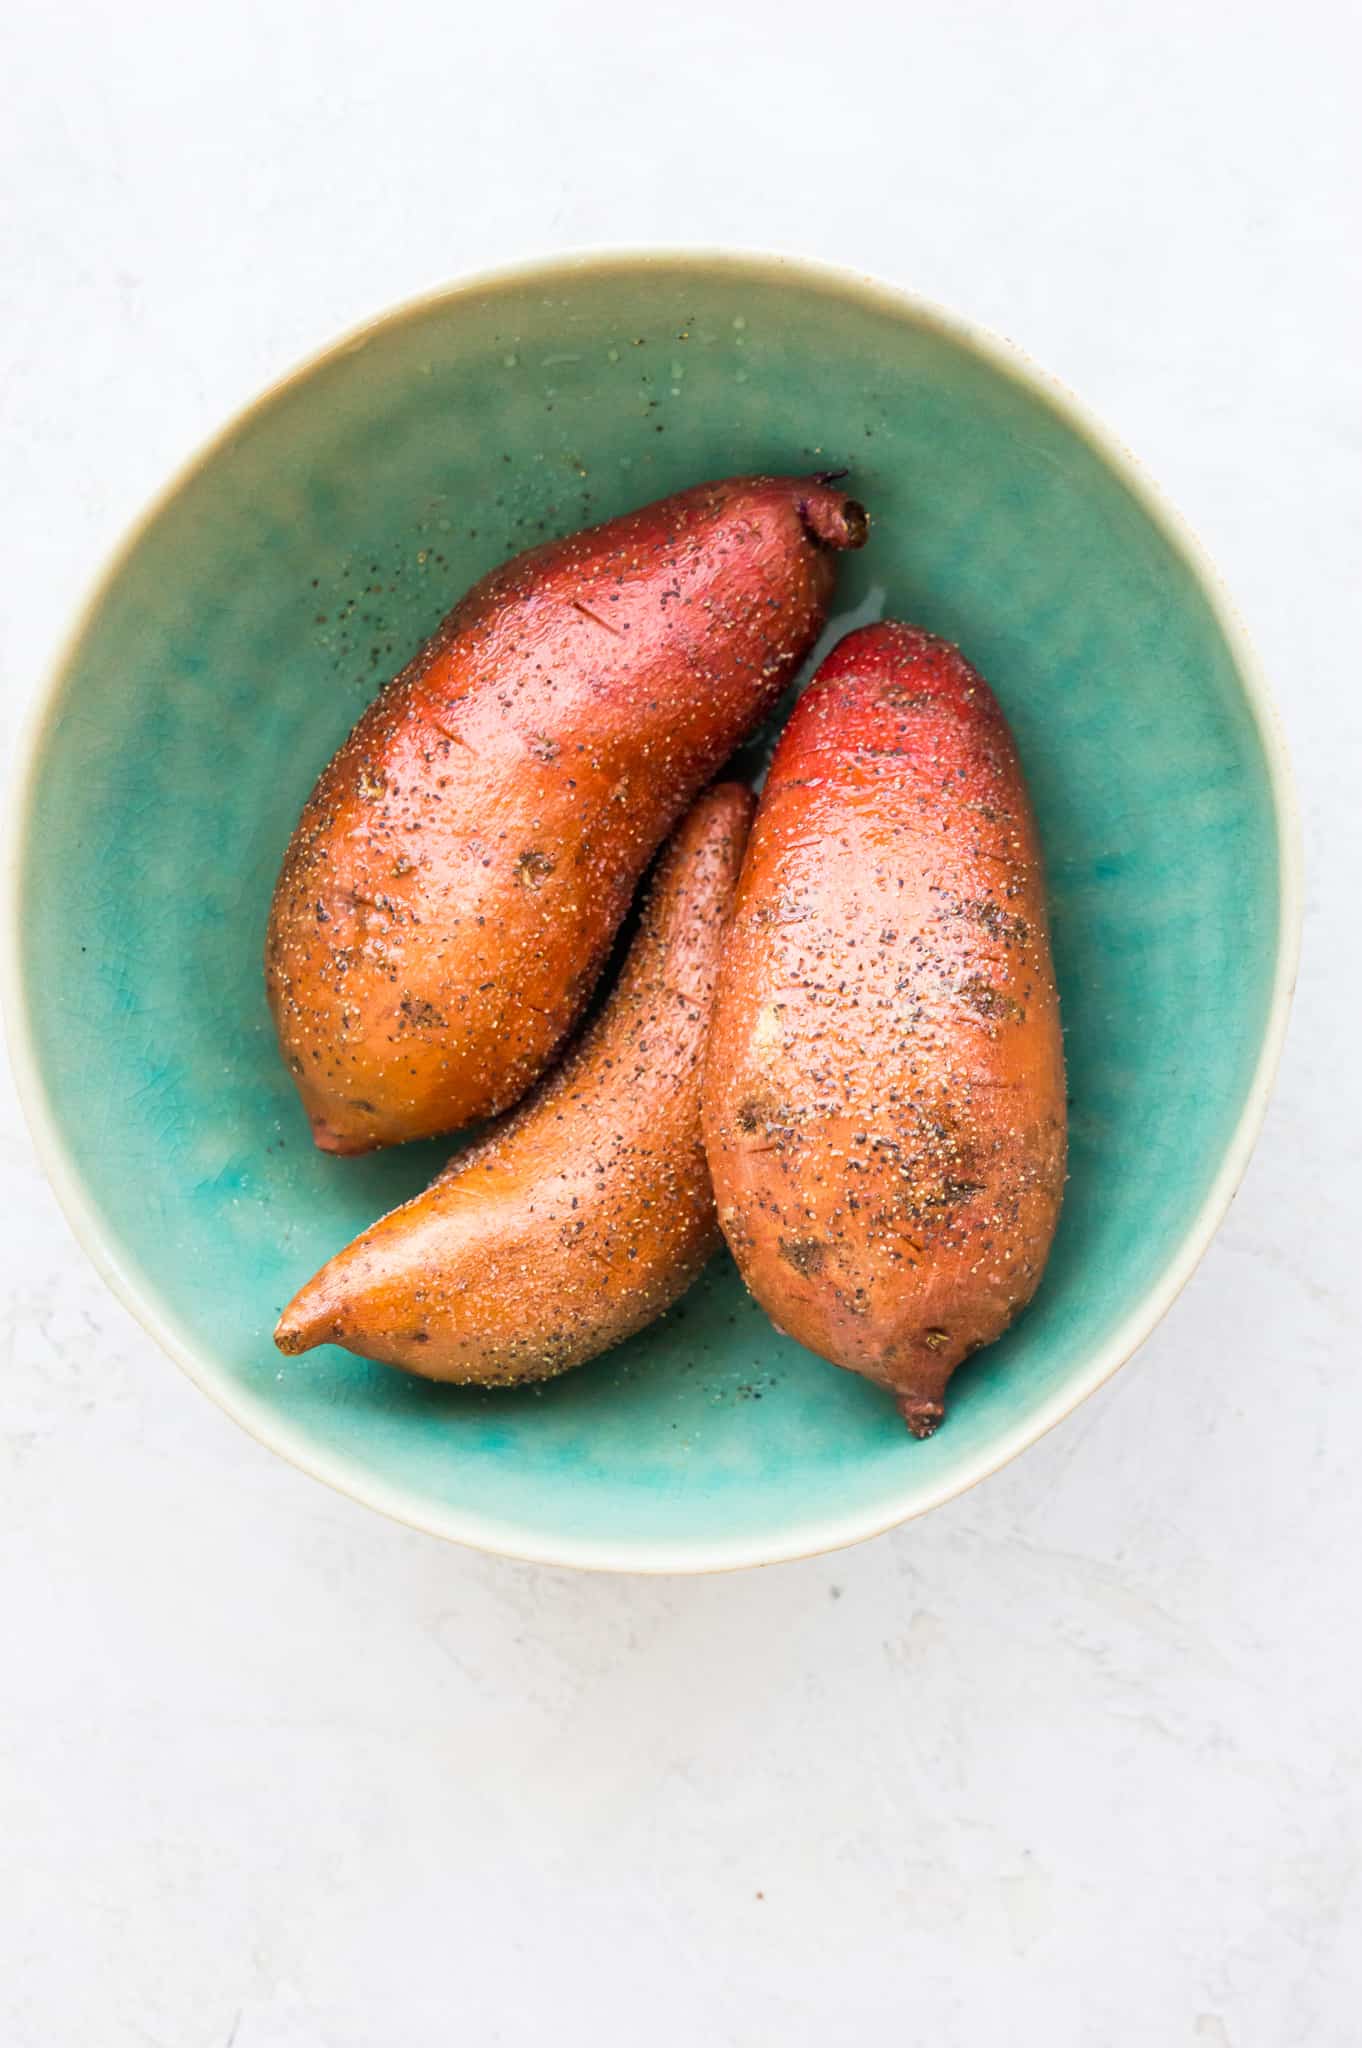 Three whole sweet potatoes in a bowl.